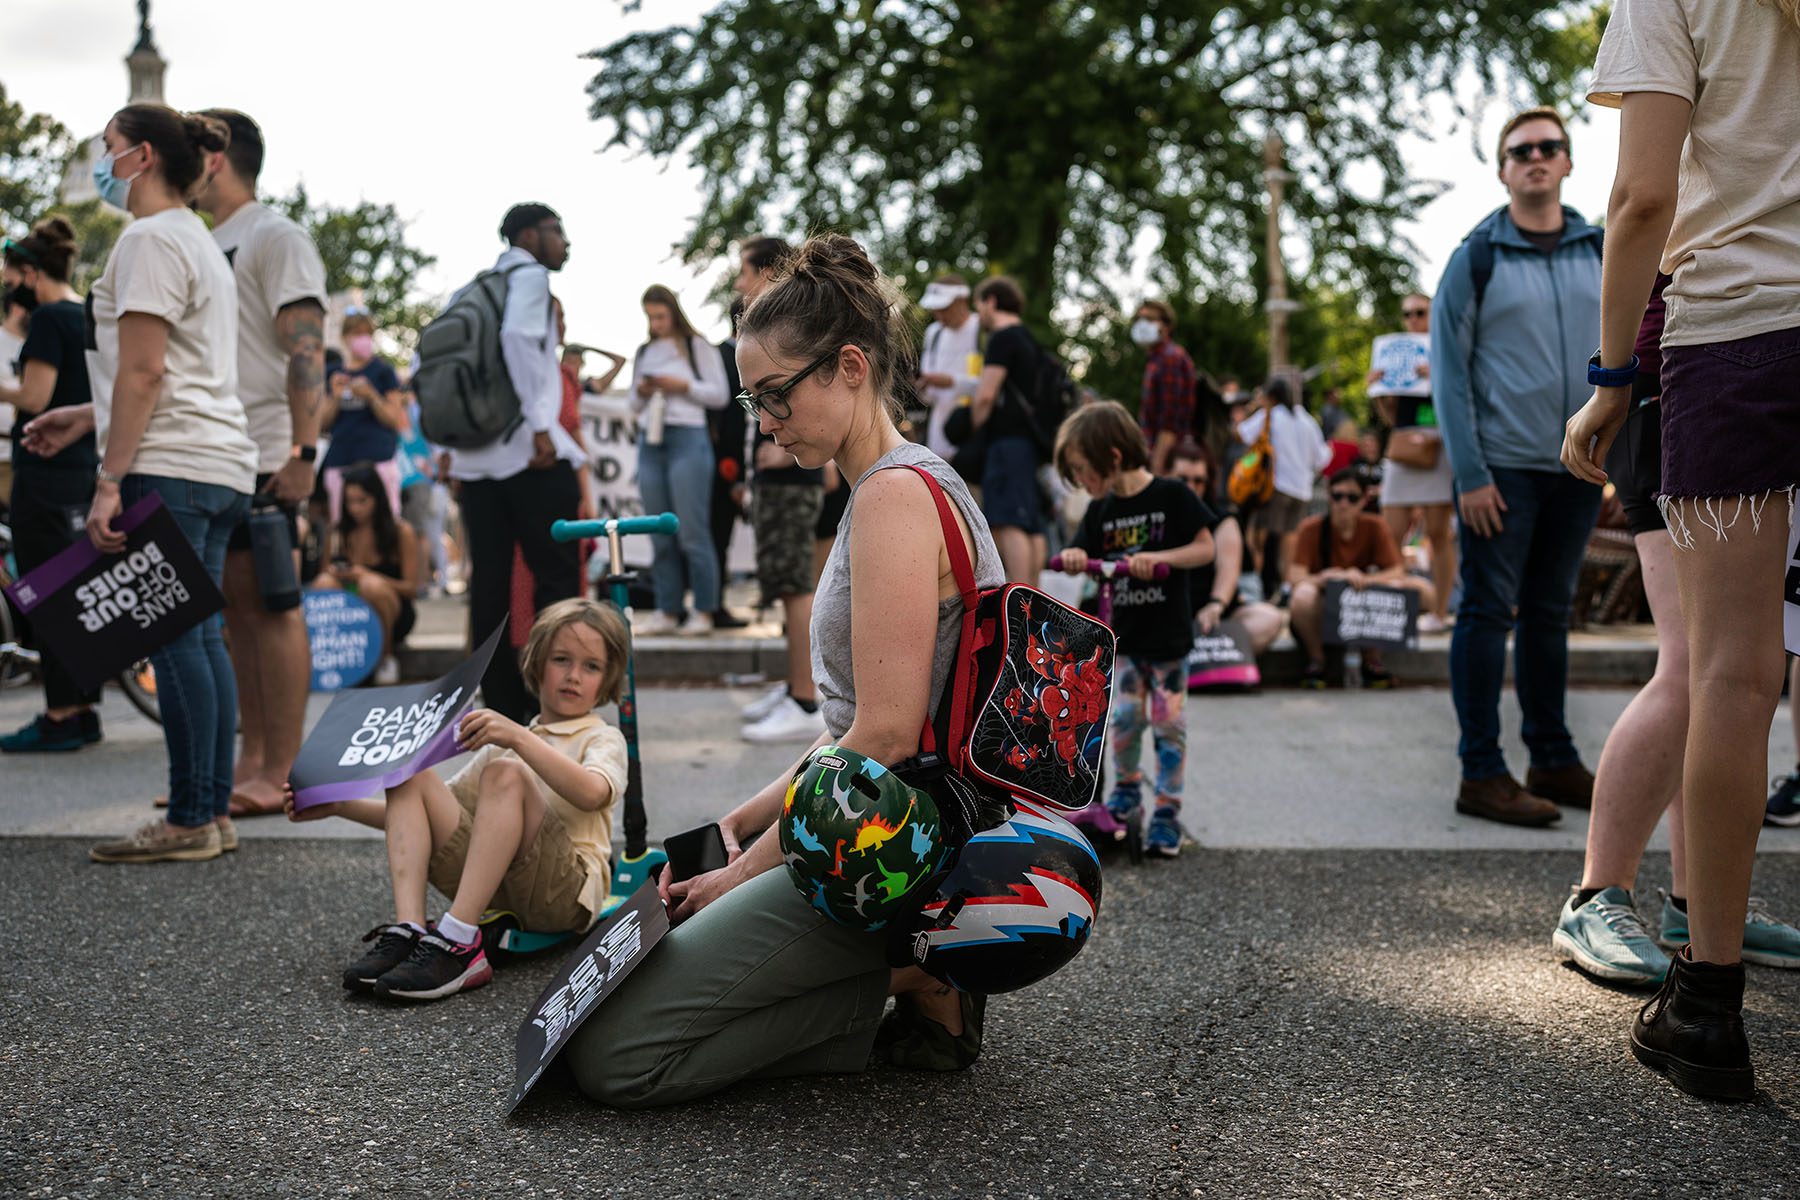 Emily Blake closes her eyes as she bows her head down while her two young sons play around her. She is carrying helmets and a spiderman lunchbox. One of her sons holds a signs that reads "Bans Off Our Bodies."